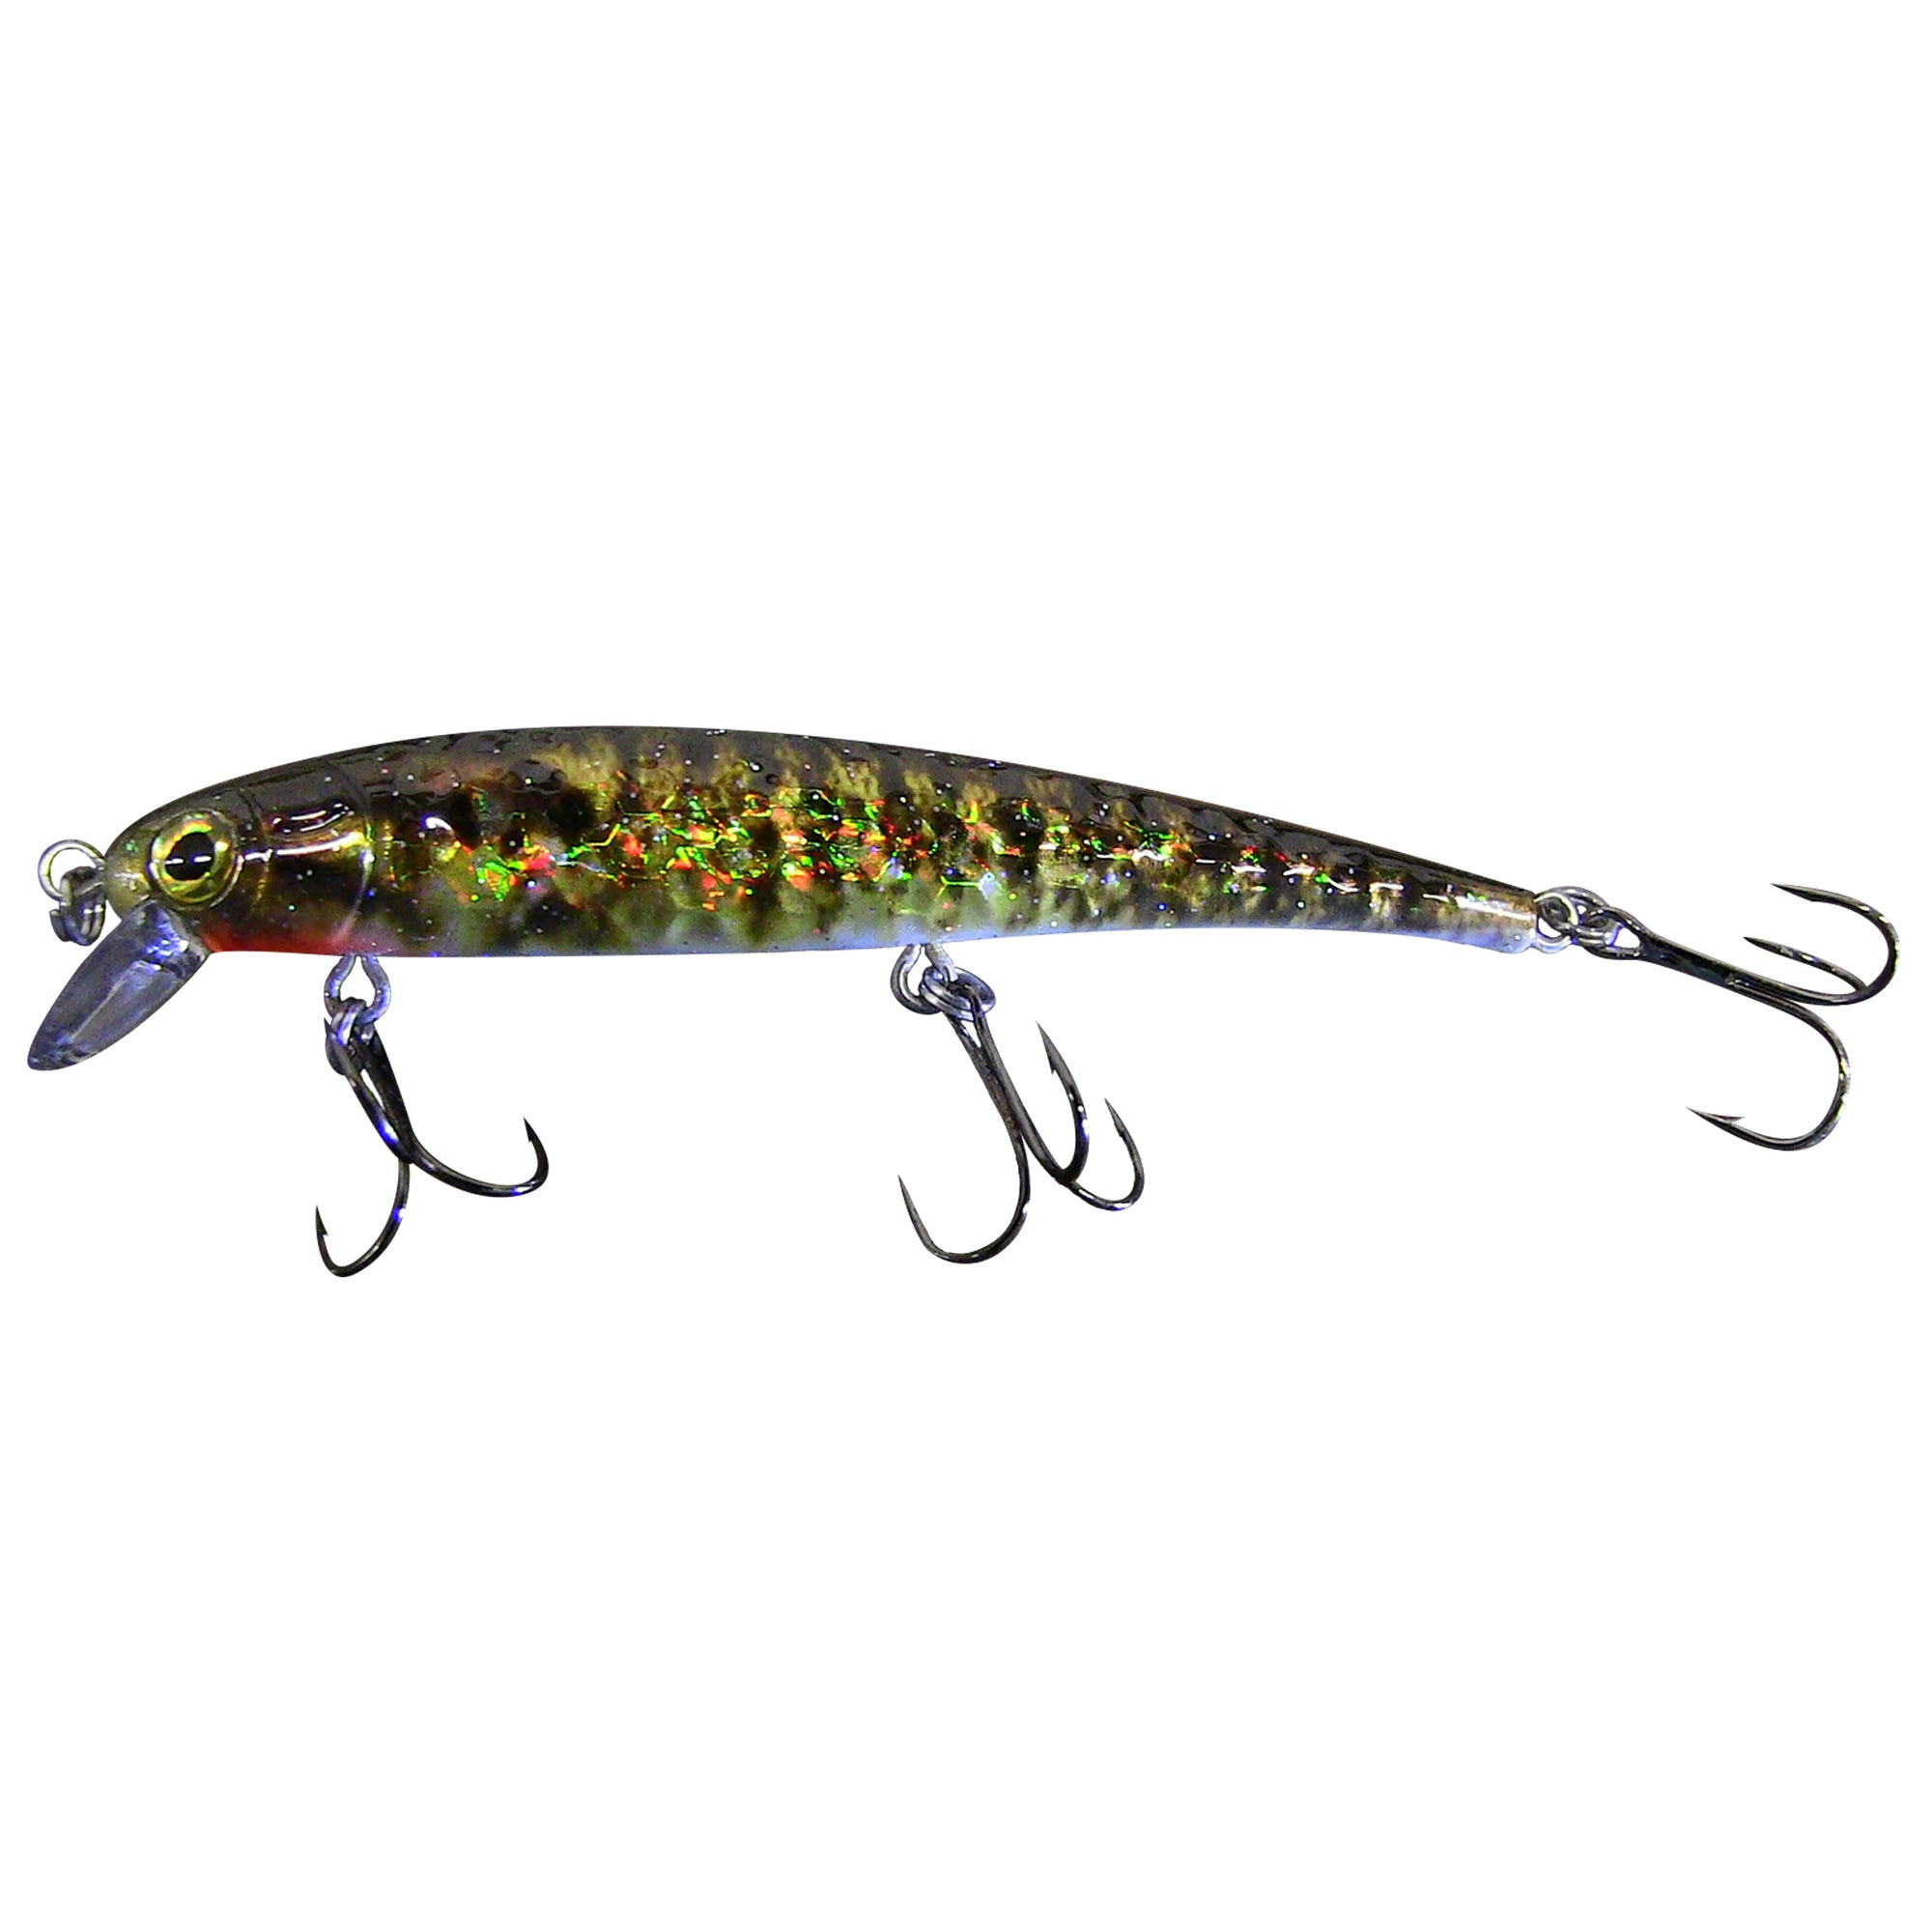 Small Mouth Bass Shallow Diver Live Bait Series - Reno Bait Company